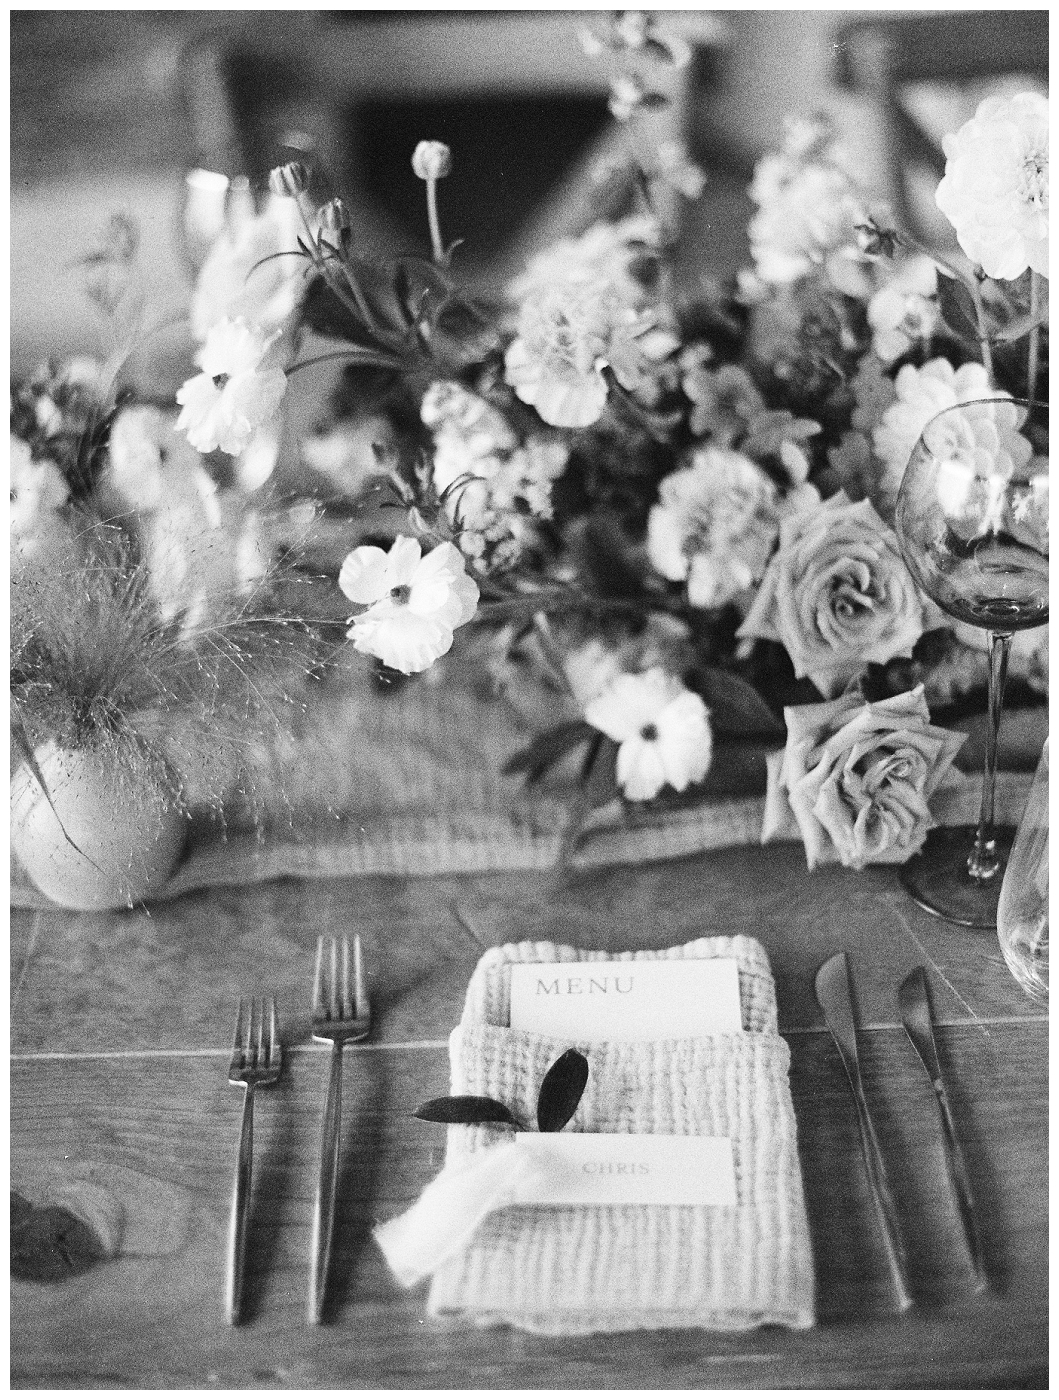 black and white photo of reception table place setting with centerpiece and budvase, del mar surf station, farmhouse table, budvases ,outdoor reception, medium sized centerpieces, romantic weddings, daisies, toffee roses, berries, cream flowers, white flowers, hydrangeas, majolica roses, explosion grass, outdoor wedding, covid wedding, san diego wedding florist, southern california elopement florist, socal florist, best wedding florist san diego ca, best wedding florist southern california, los angeles wedding florist, top rated wedding florist in california, del mar san diego, blush tapered candles, blush table runner, budvases